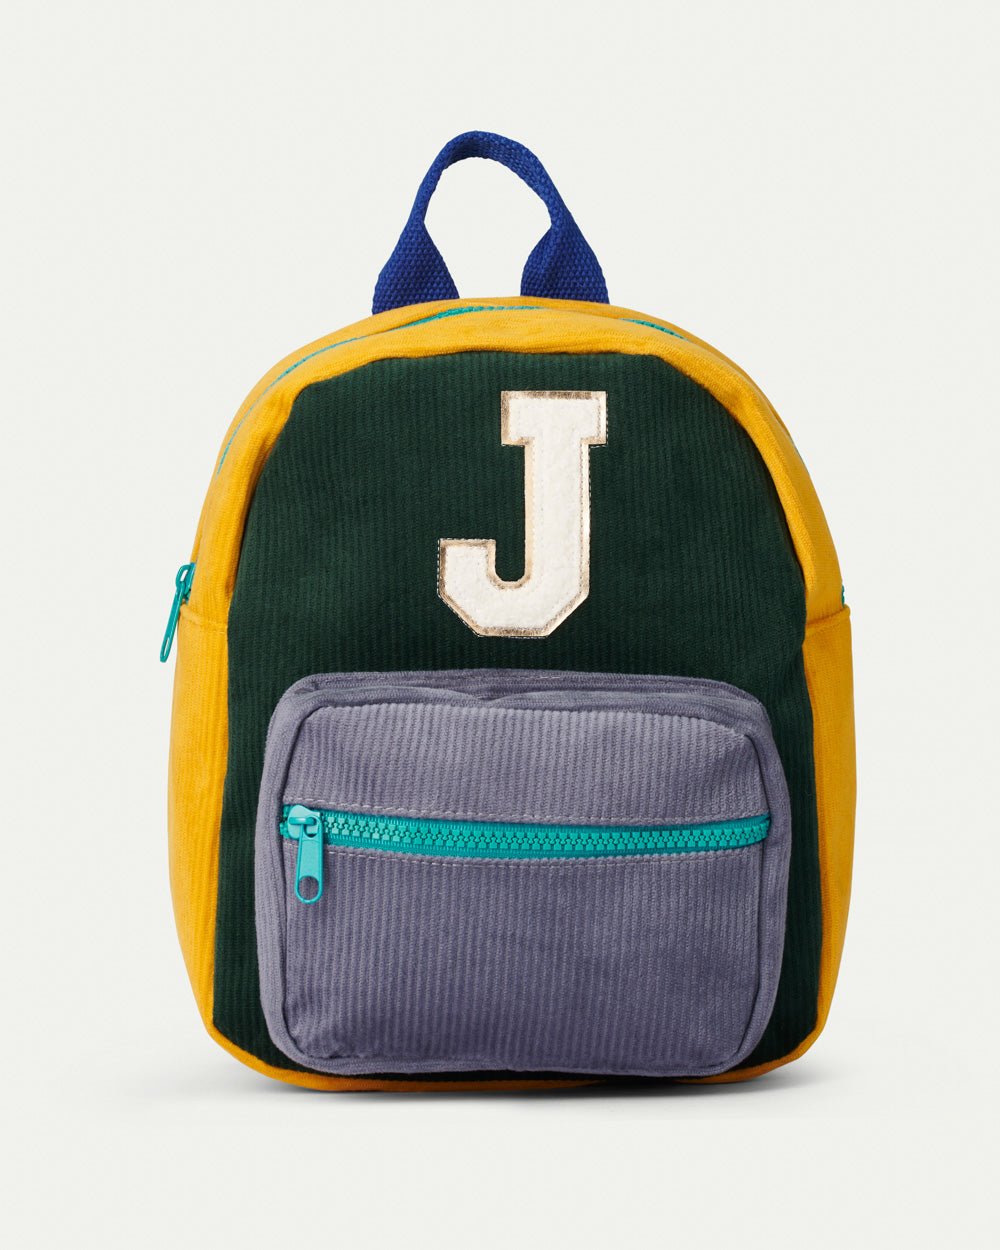 Boys Initial Cord Backpack - Small Stuff Accessories